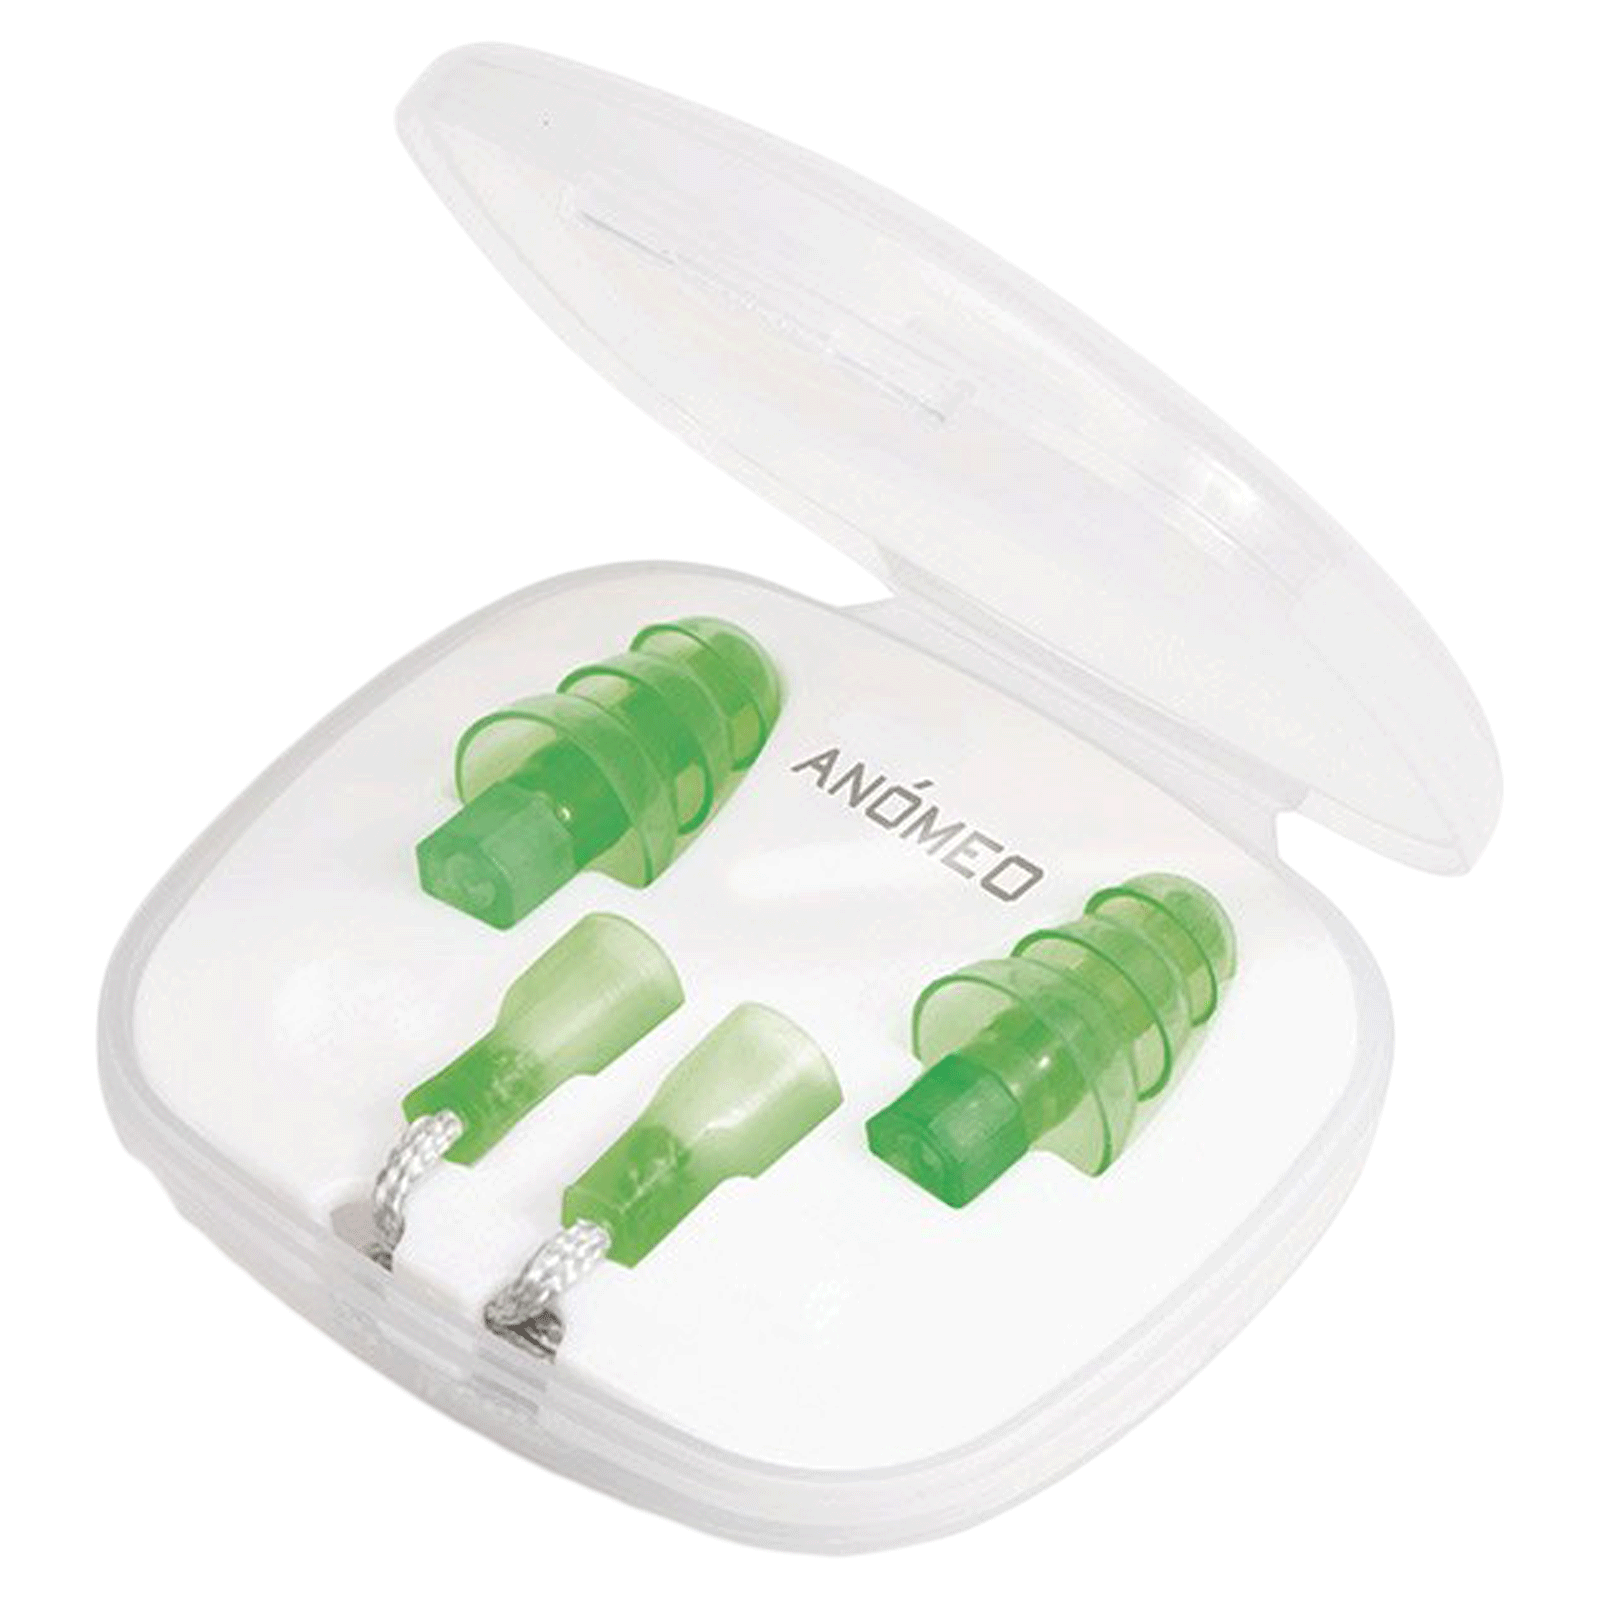 Anomeo Travel Silicone and Polypropylene Earplugs (Optimal Sound Protection, 2426, Green)